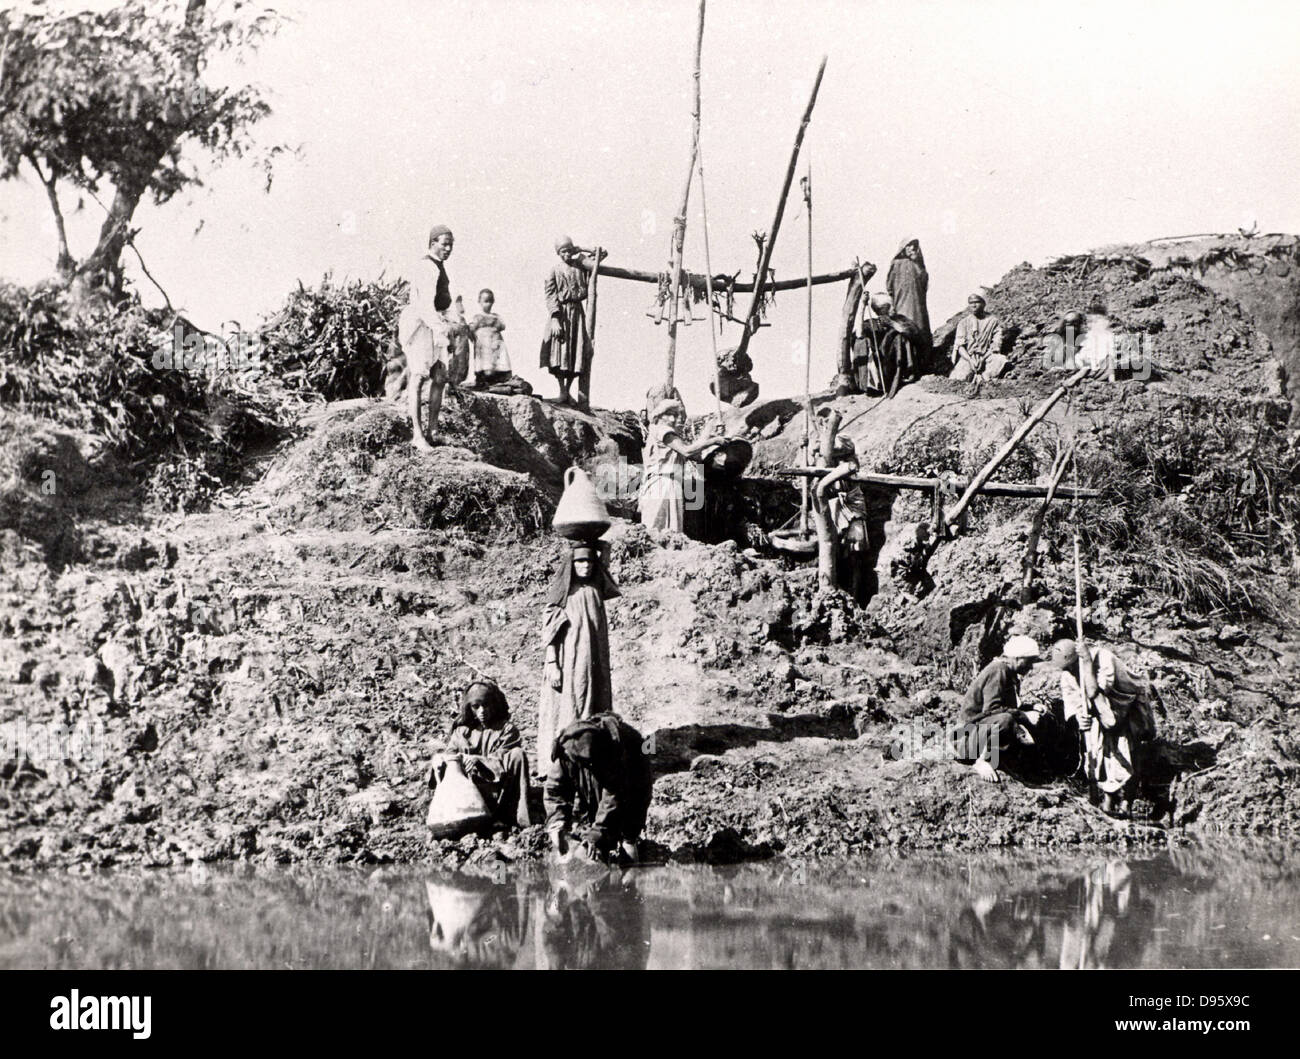 A shaduf or shadoof being used to raise water, Egypt, late 1880s. The shaduf has been used for irrigation for at least as early as 1500 BC. Photograph. Water supply. Agriculture. Stock Photo